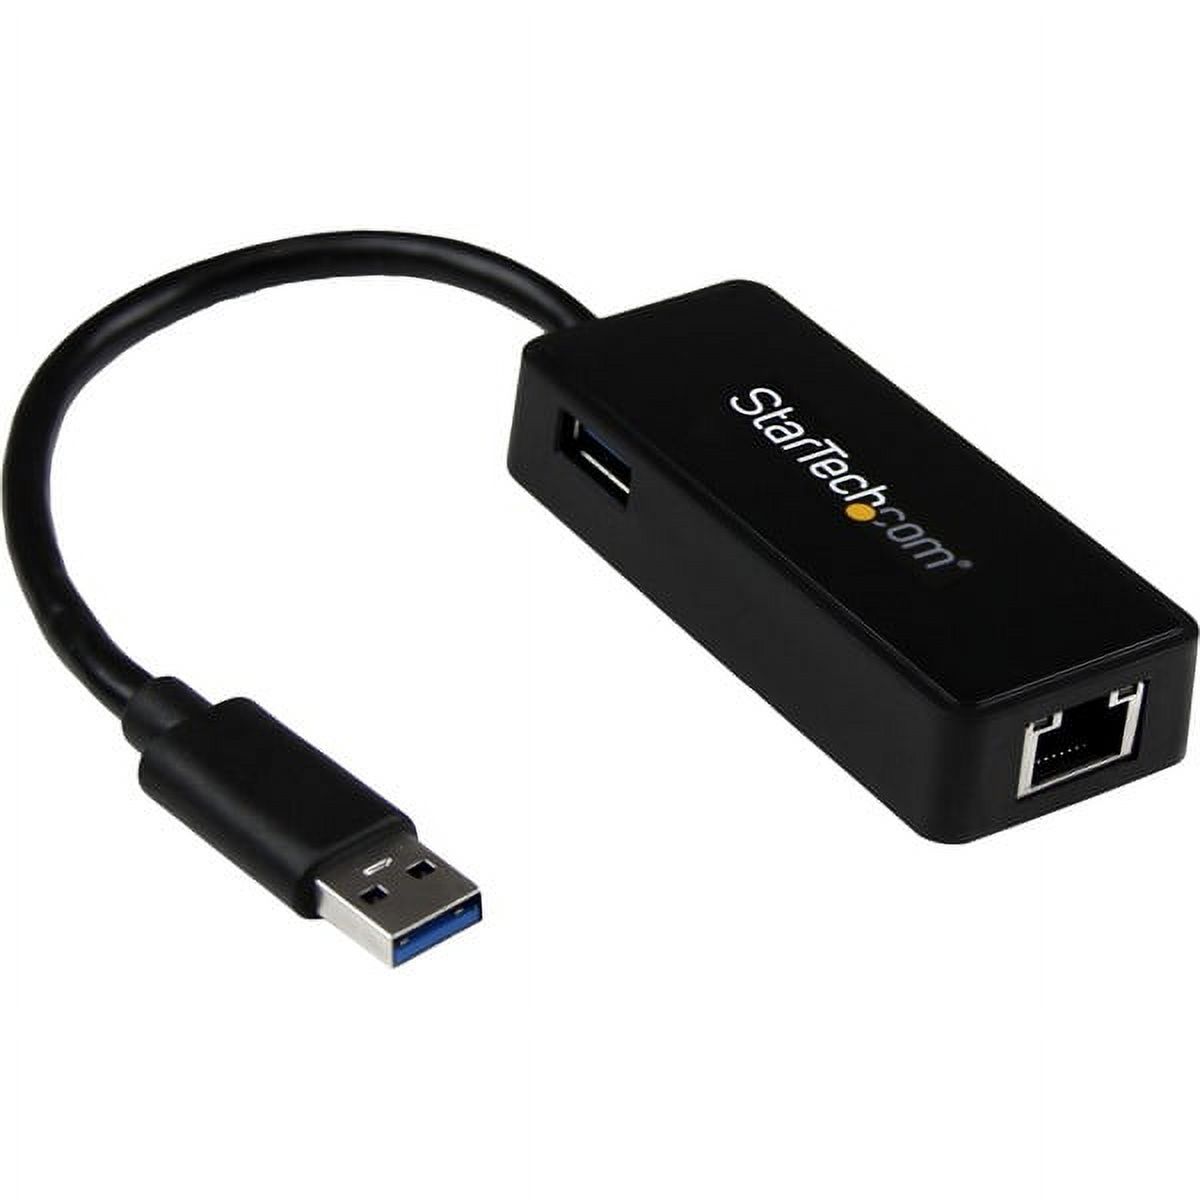 Startech USB31000SPTB GBE CTLR - image 1 of 19